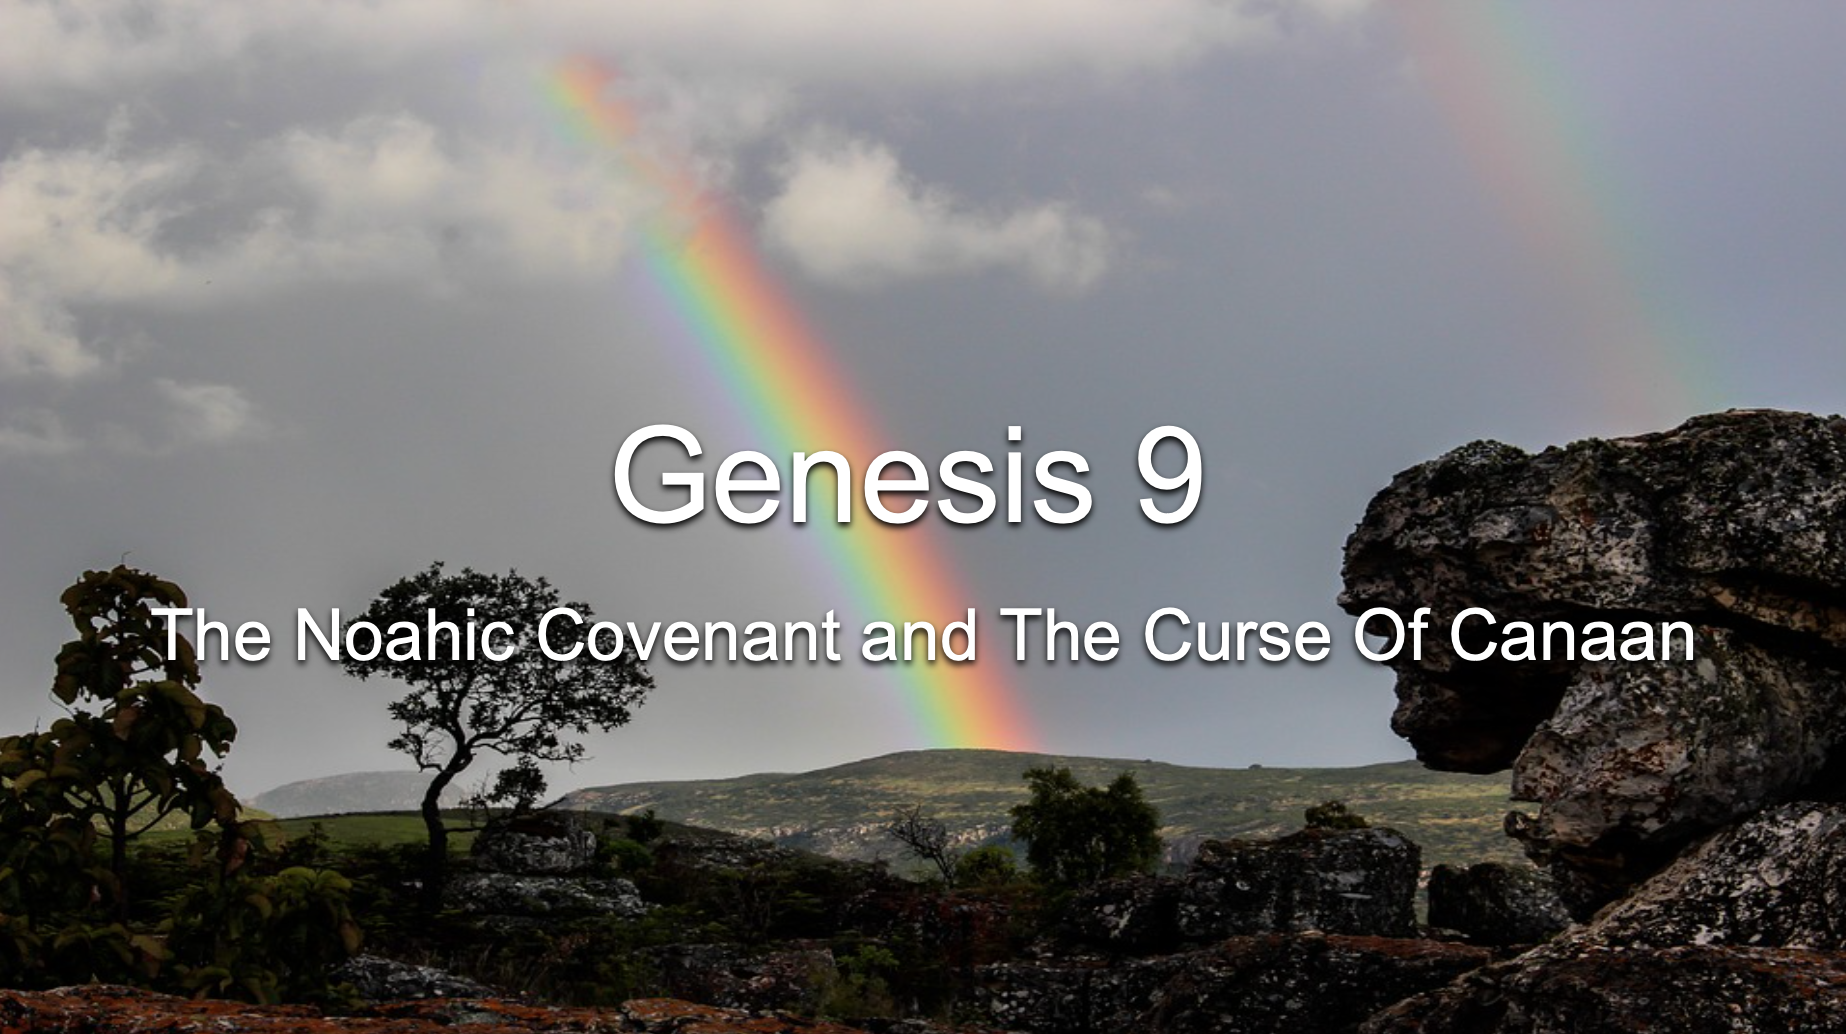 Genesis 7-8: The Historicity and Extent Of The Flood